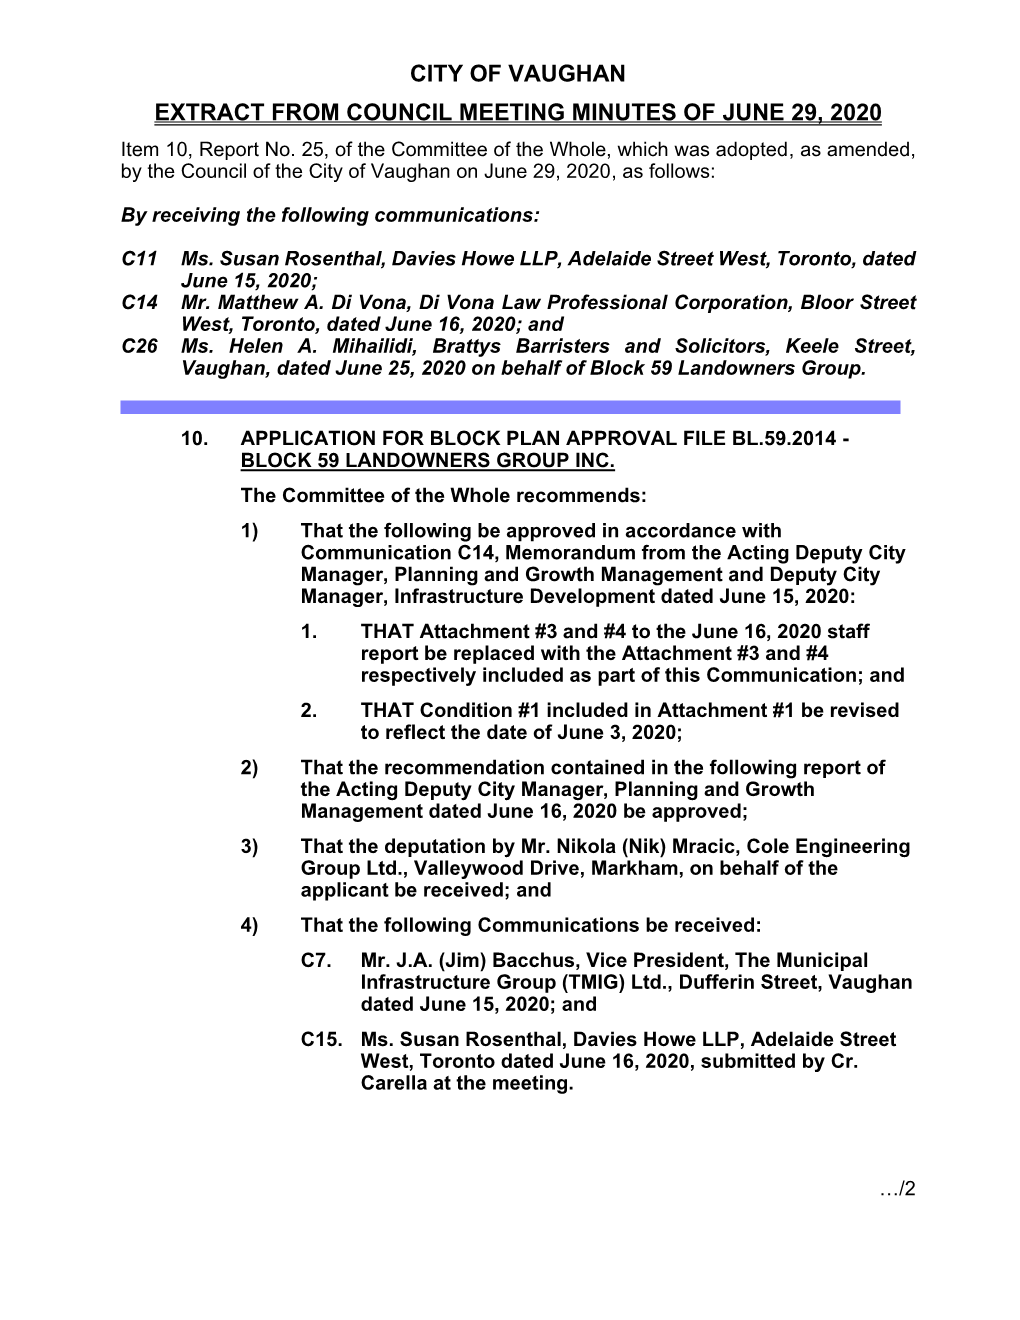 CITY of VAUGHAN EXTRACT from COUNCIL MEETING MINUTES of JUNE 29, 2020 Item 10, Report No